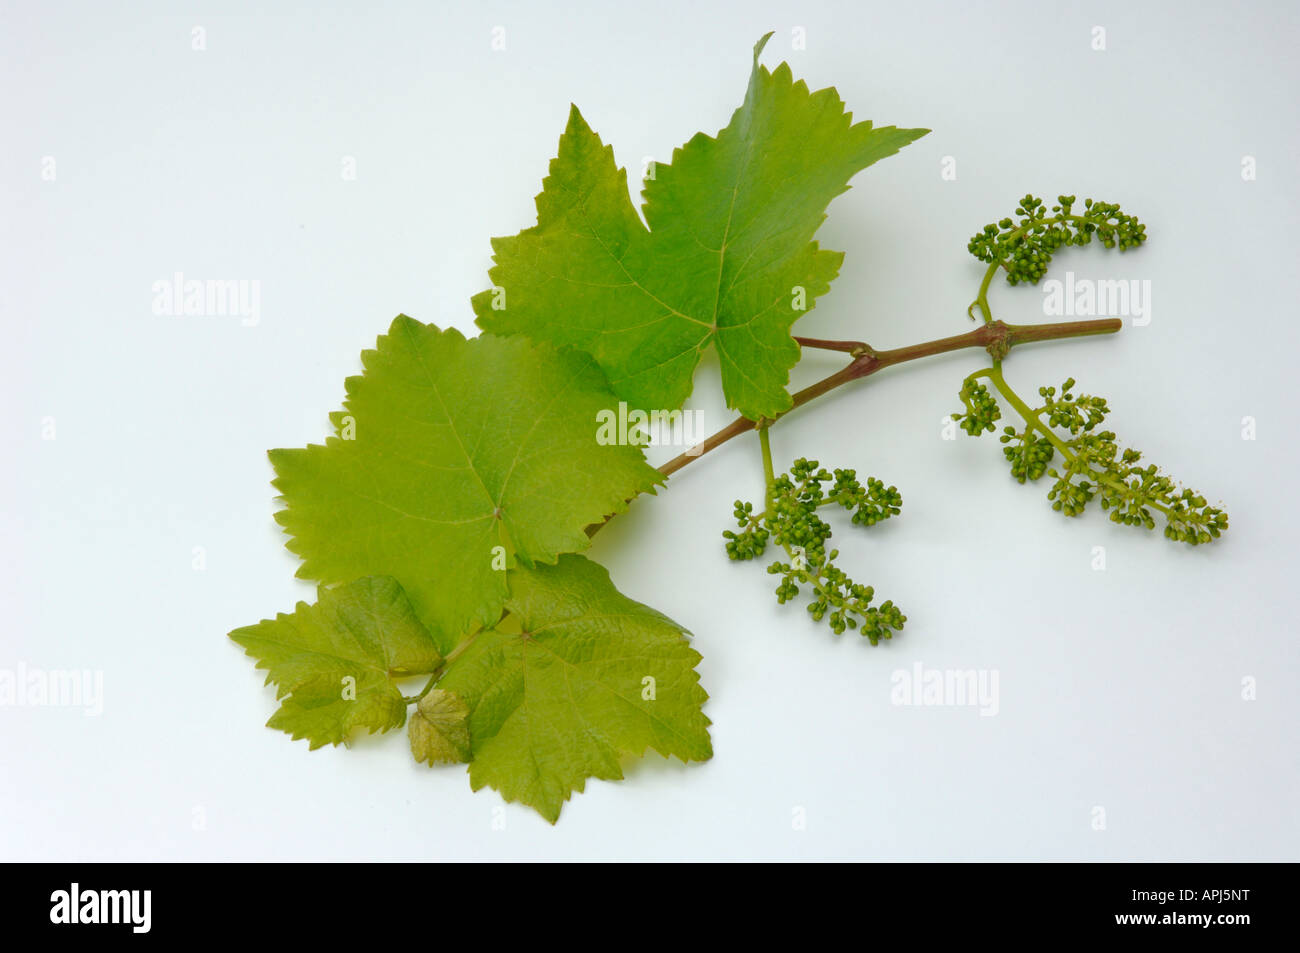 Grape Vine (Vitis vinifera), twig with leaves and flower buds, studio picture Stock Photo